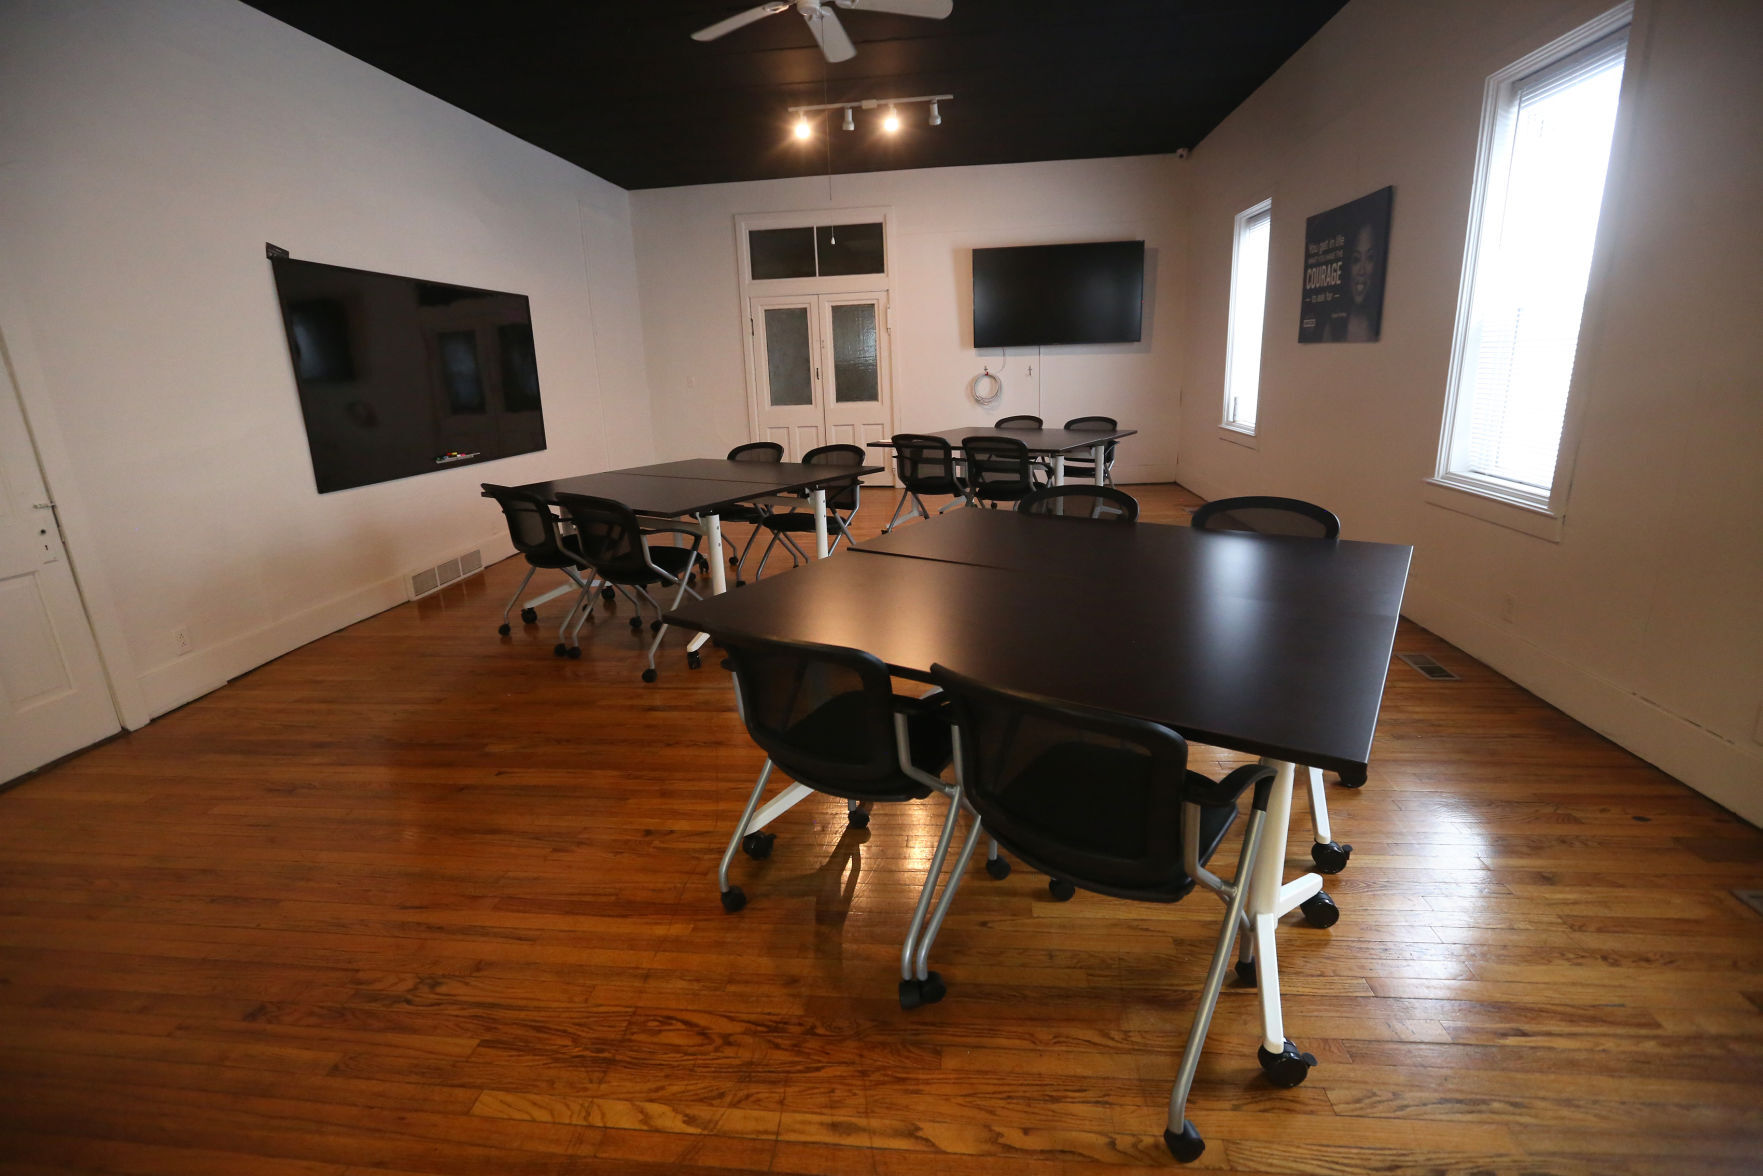 A meeting room at The Innovation Lab in Cascade, Iowa. PHOTO CREDIT: JESSICA REILLY